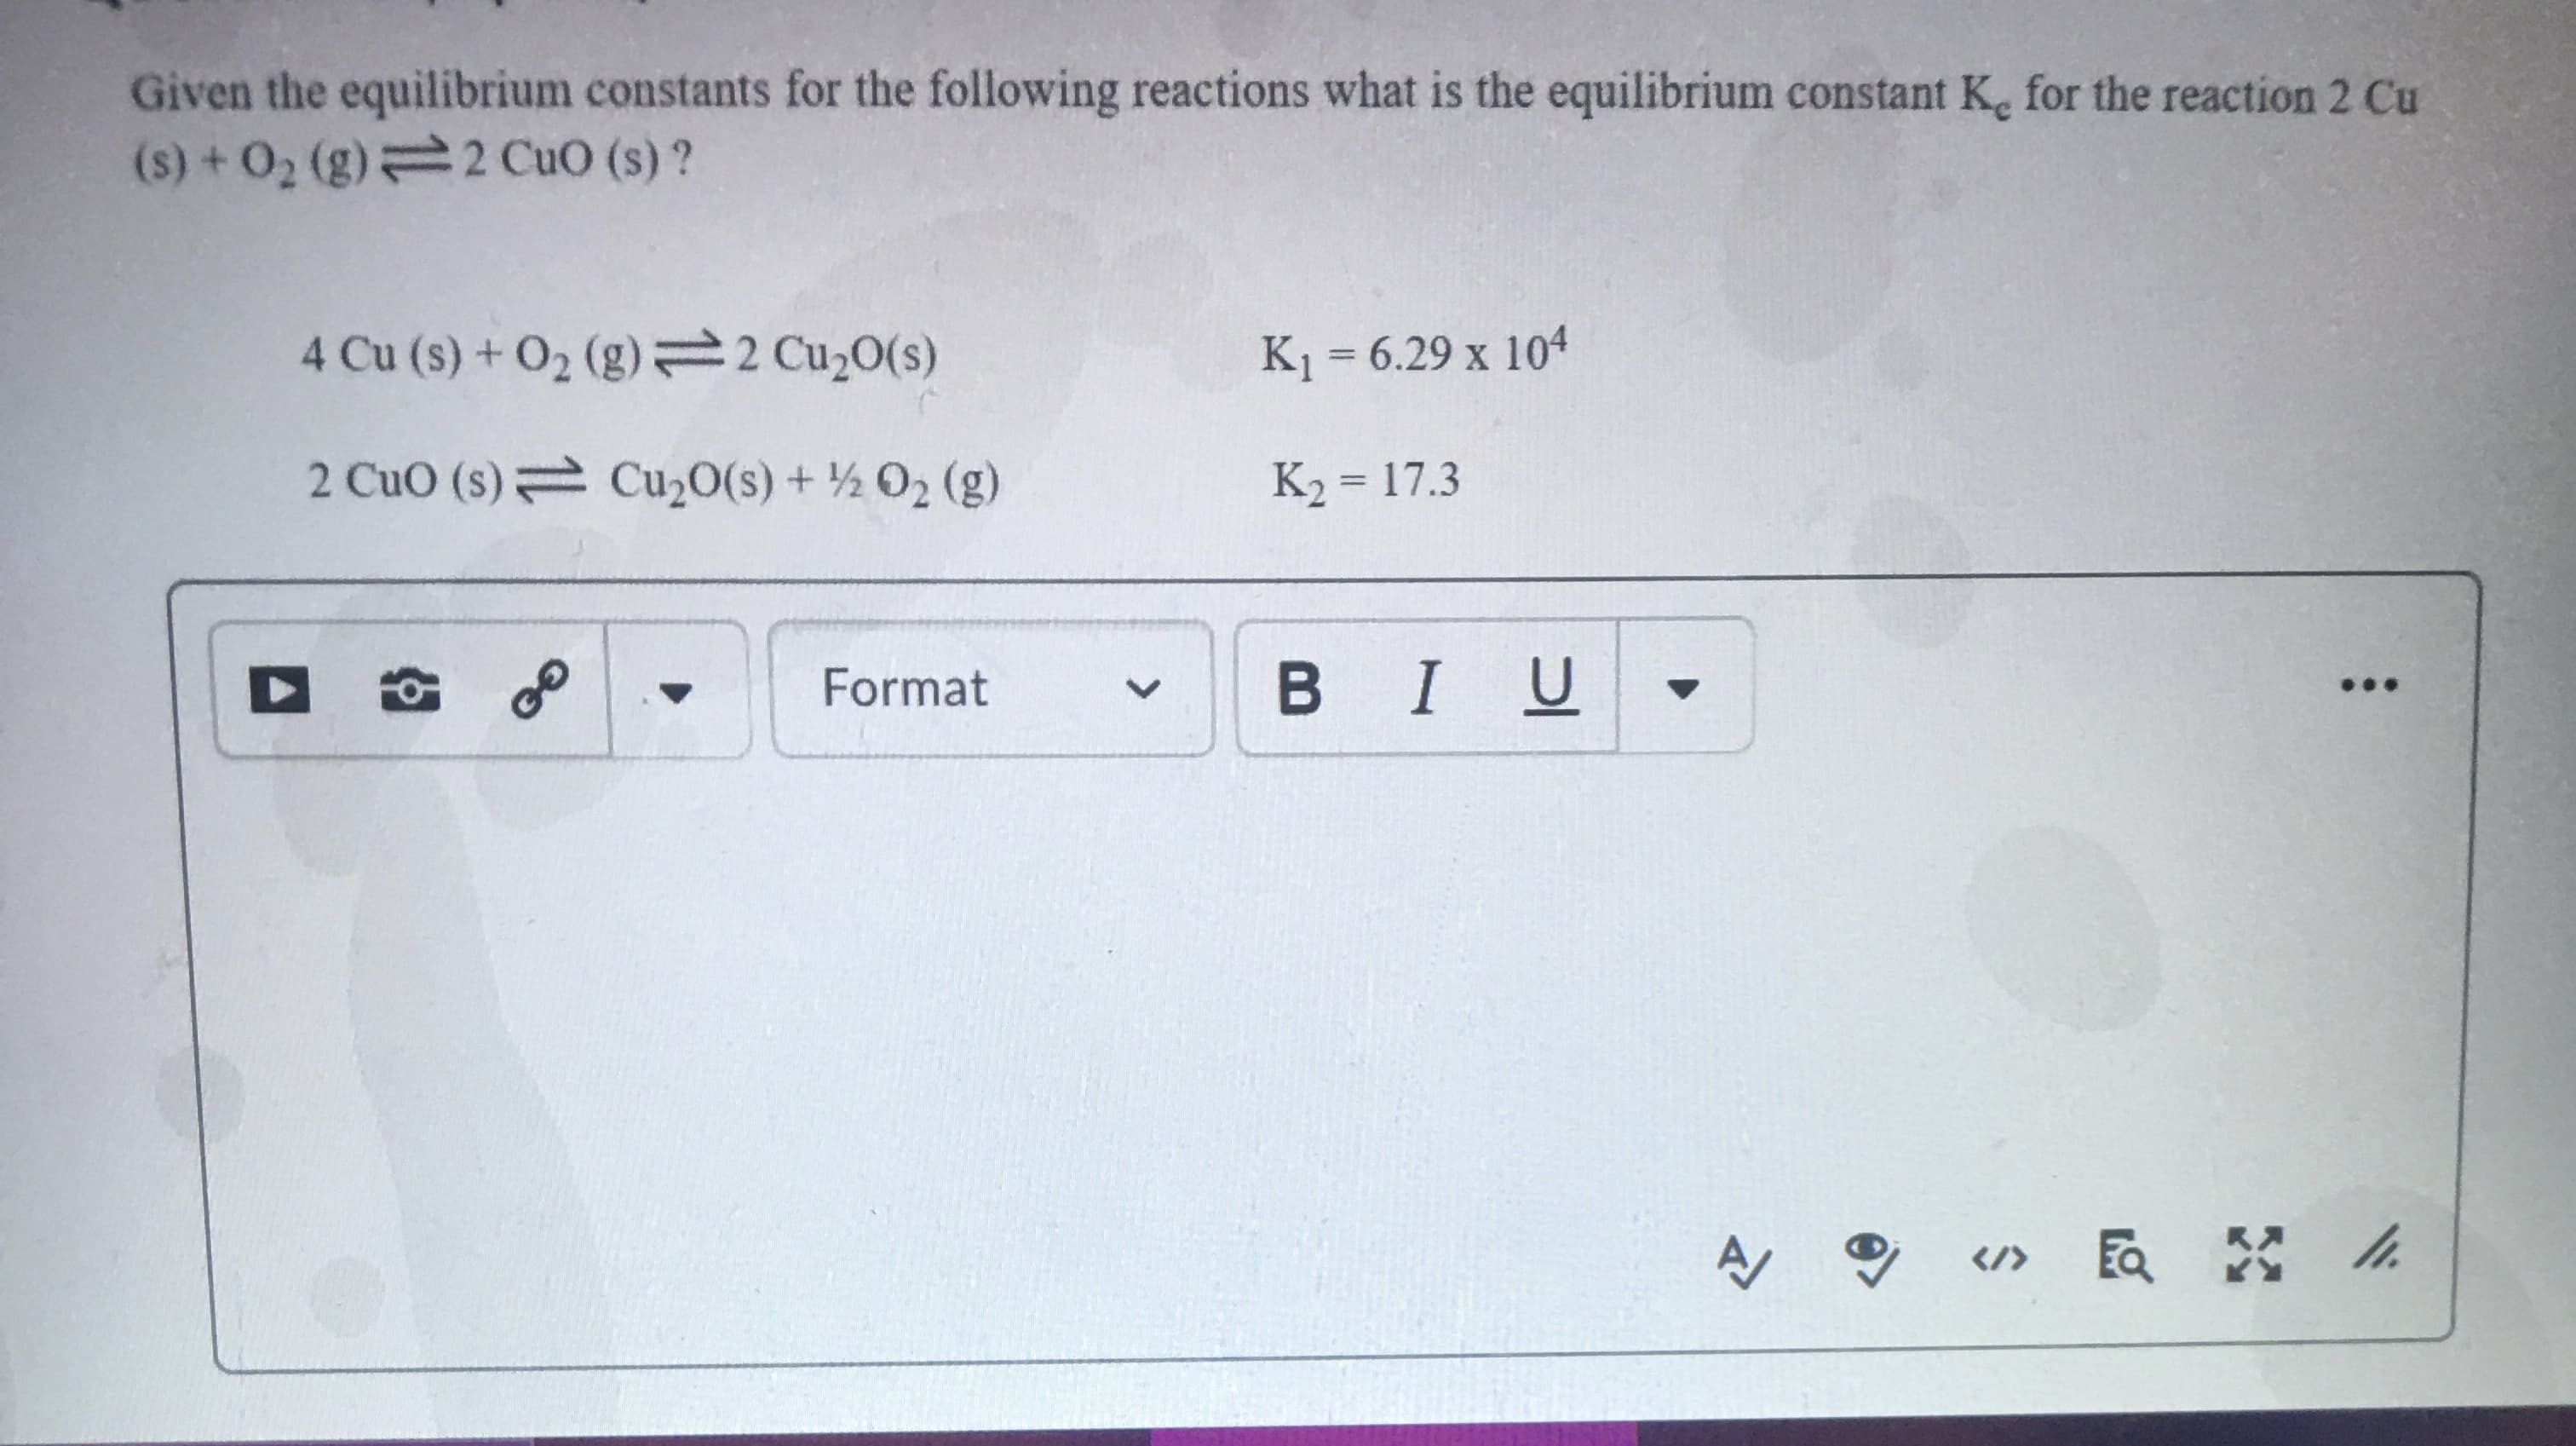 Given the equilibrium constants for the following reactions what is the equilibrium constant K. for the reaction 2 Cu
(s) + O2 (g) 2 CuO (s)?
4 Cu (s) +O2 (g) 2 Cu20(s)
K1 = 6.29 x 104
2 CuO (s) Cu,0(s) + ½ 02 (g)
K2 = 17.3
